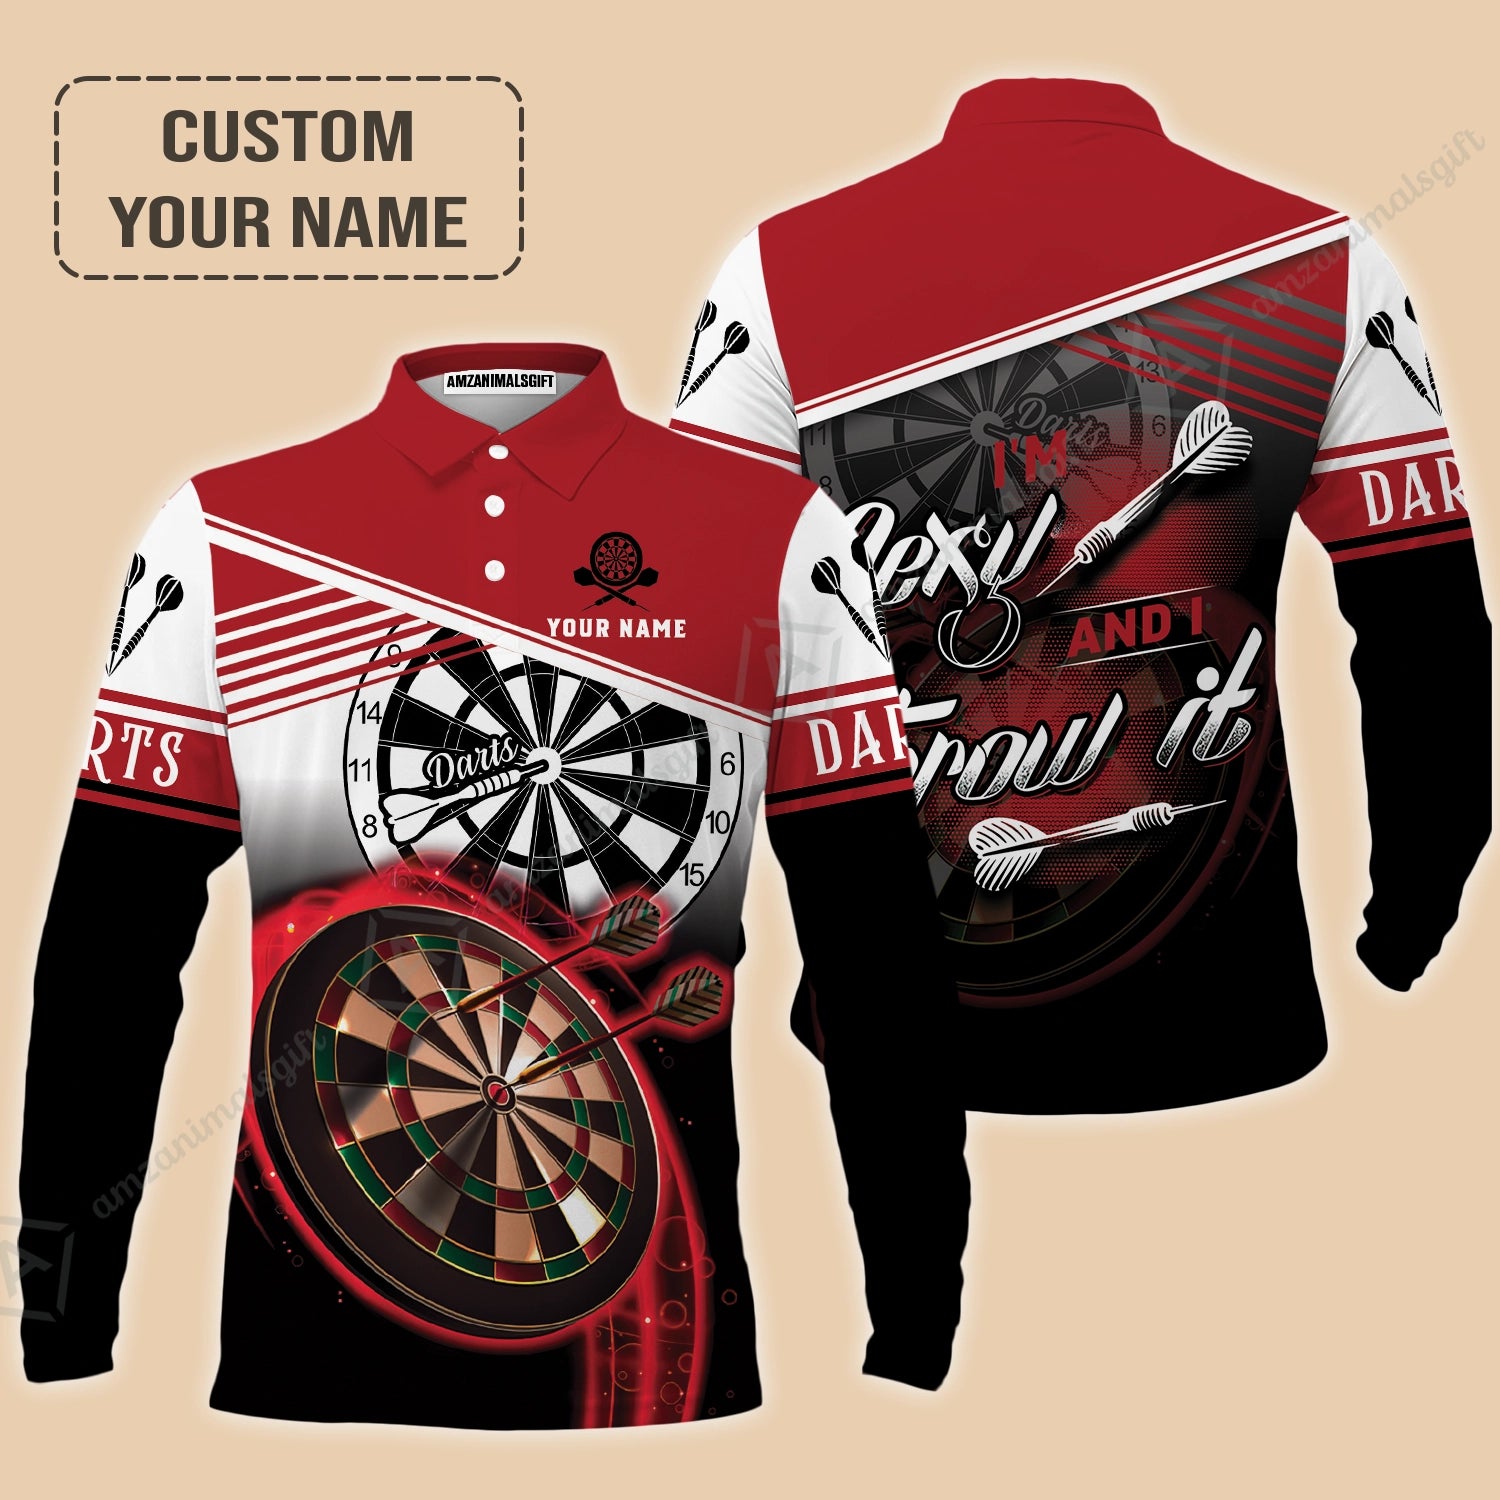 Personalized Darts Long Polo Shirt, Darts Red Color Long Sleeve Polo Shirt I'm Sexy And I Throw It, Outfits For Darts Players, Darts Team